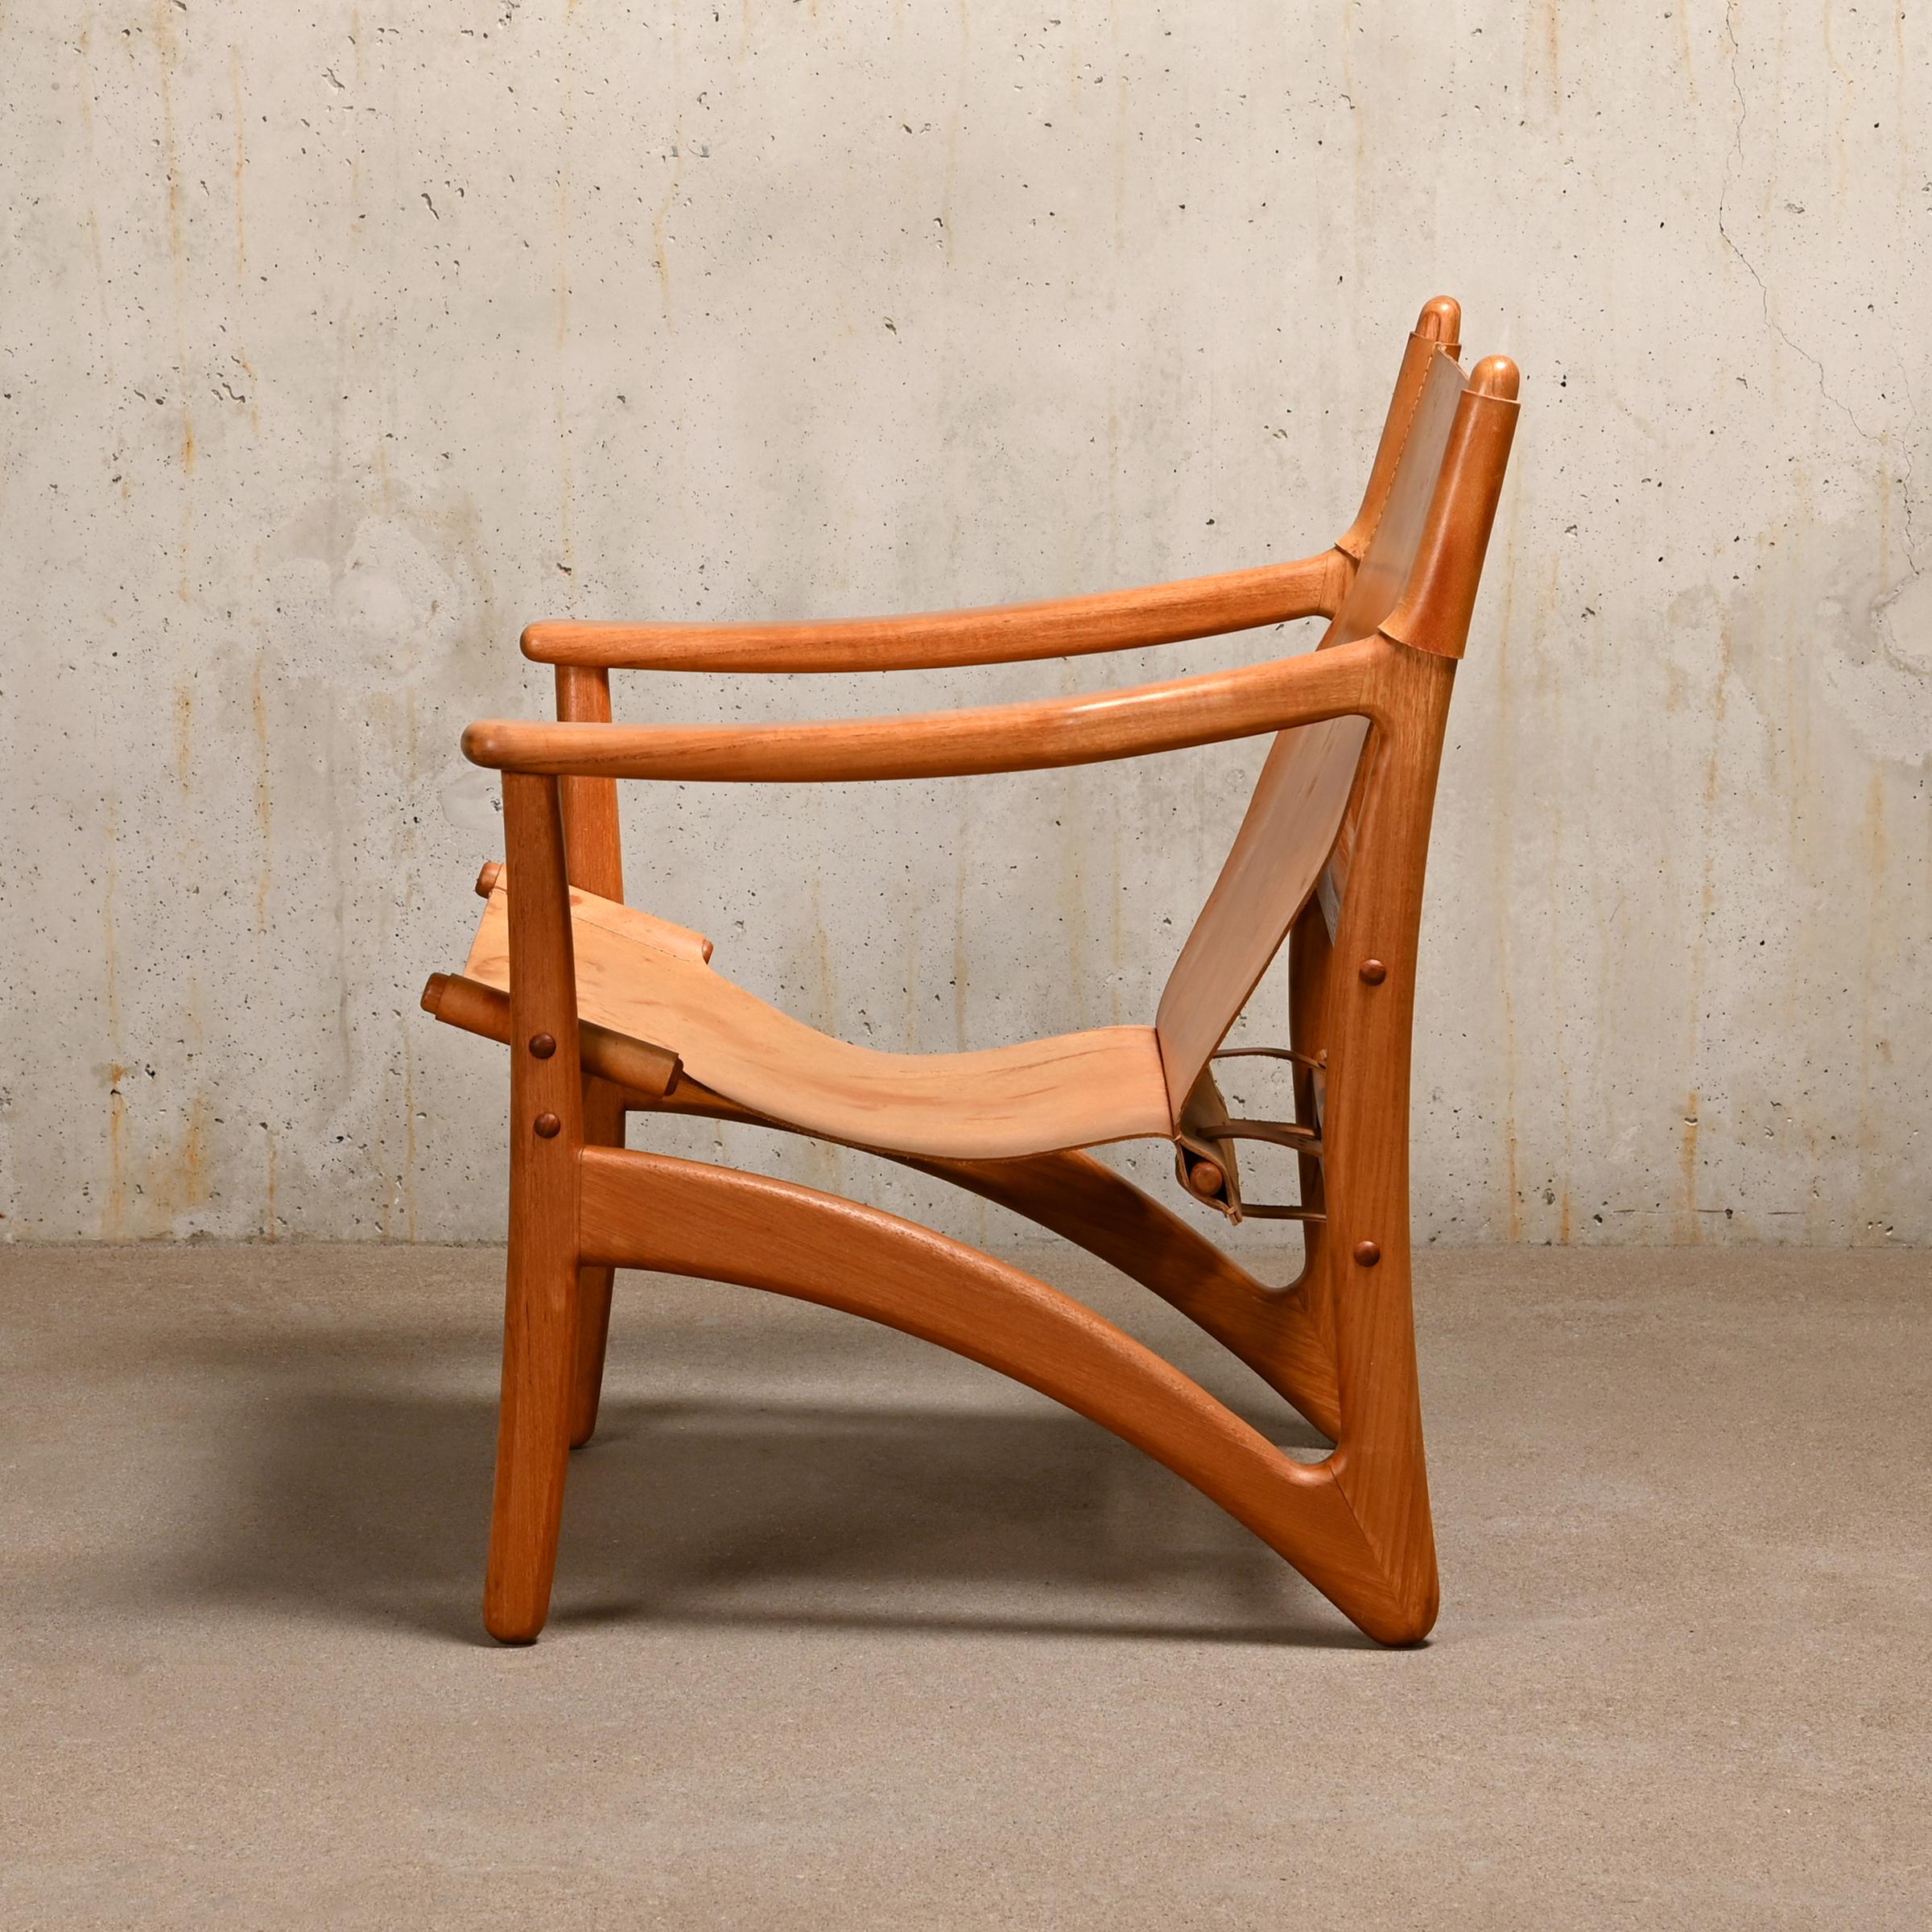 Mid-20th Century Arne Vodder Pair Lounge Chairs in Teak and Saddle Leather for Kircodan, Denmark